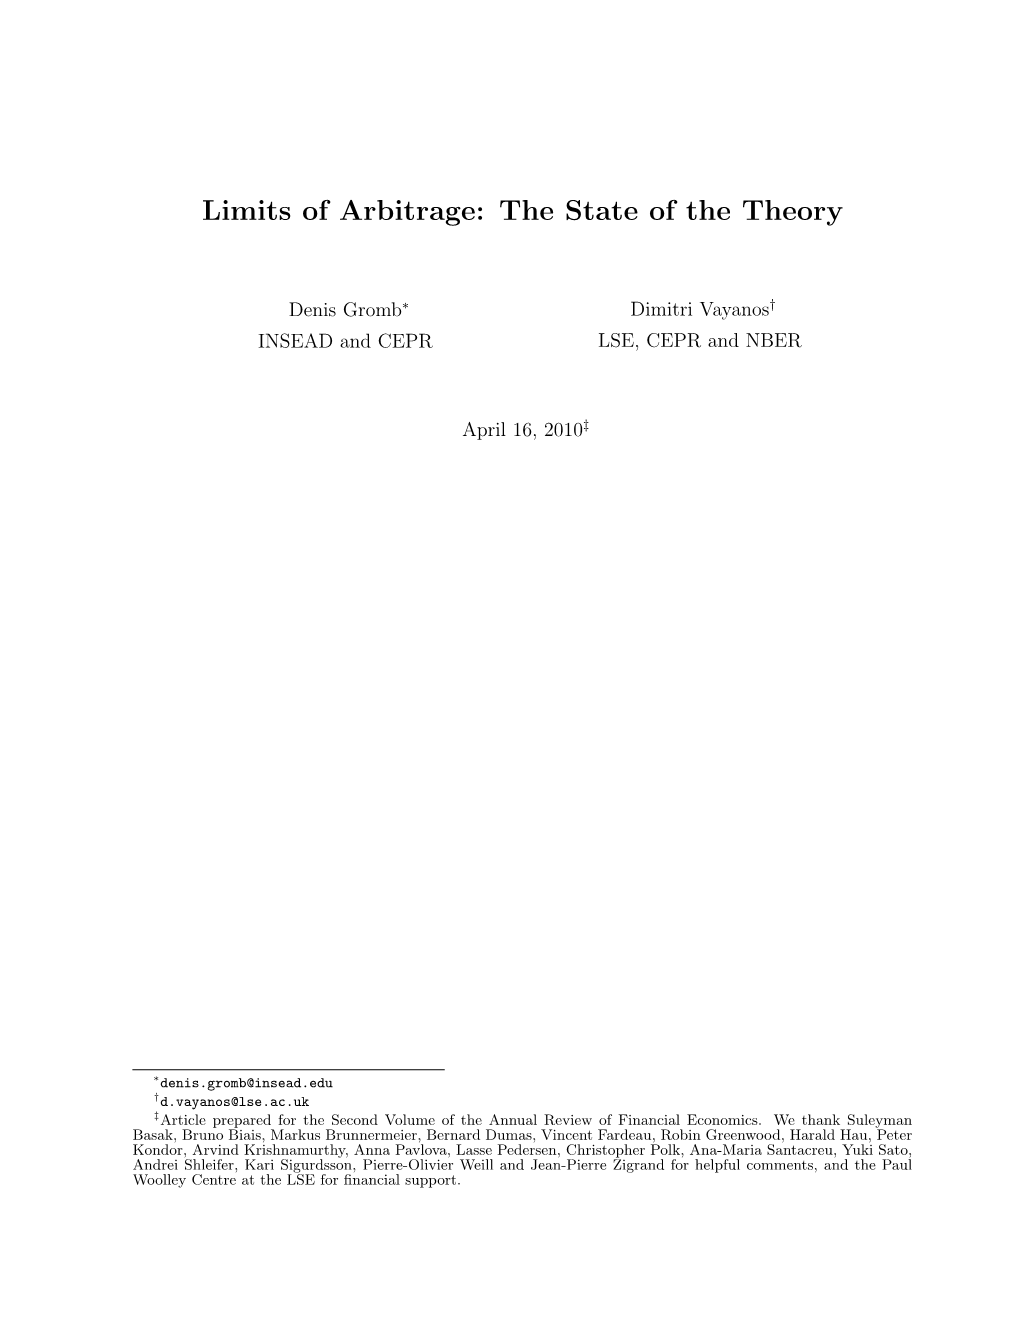 Limits of Arbitrage: the State of the Theory